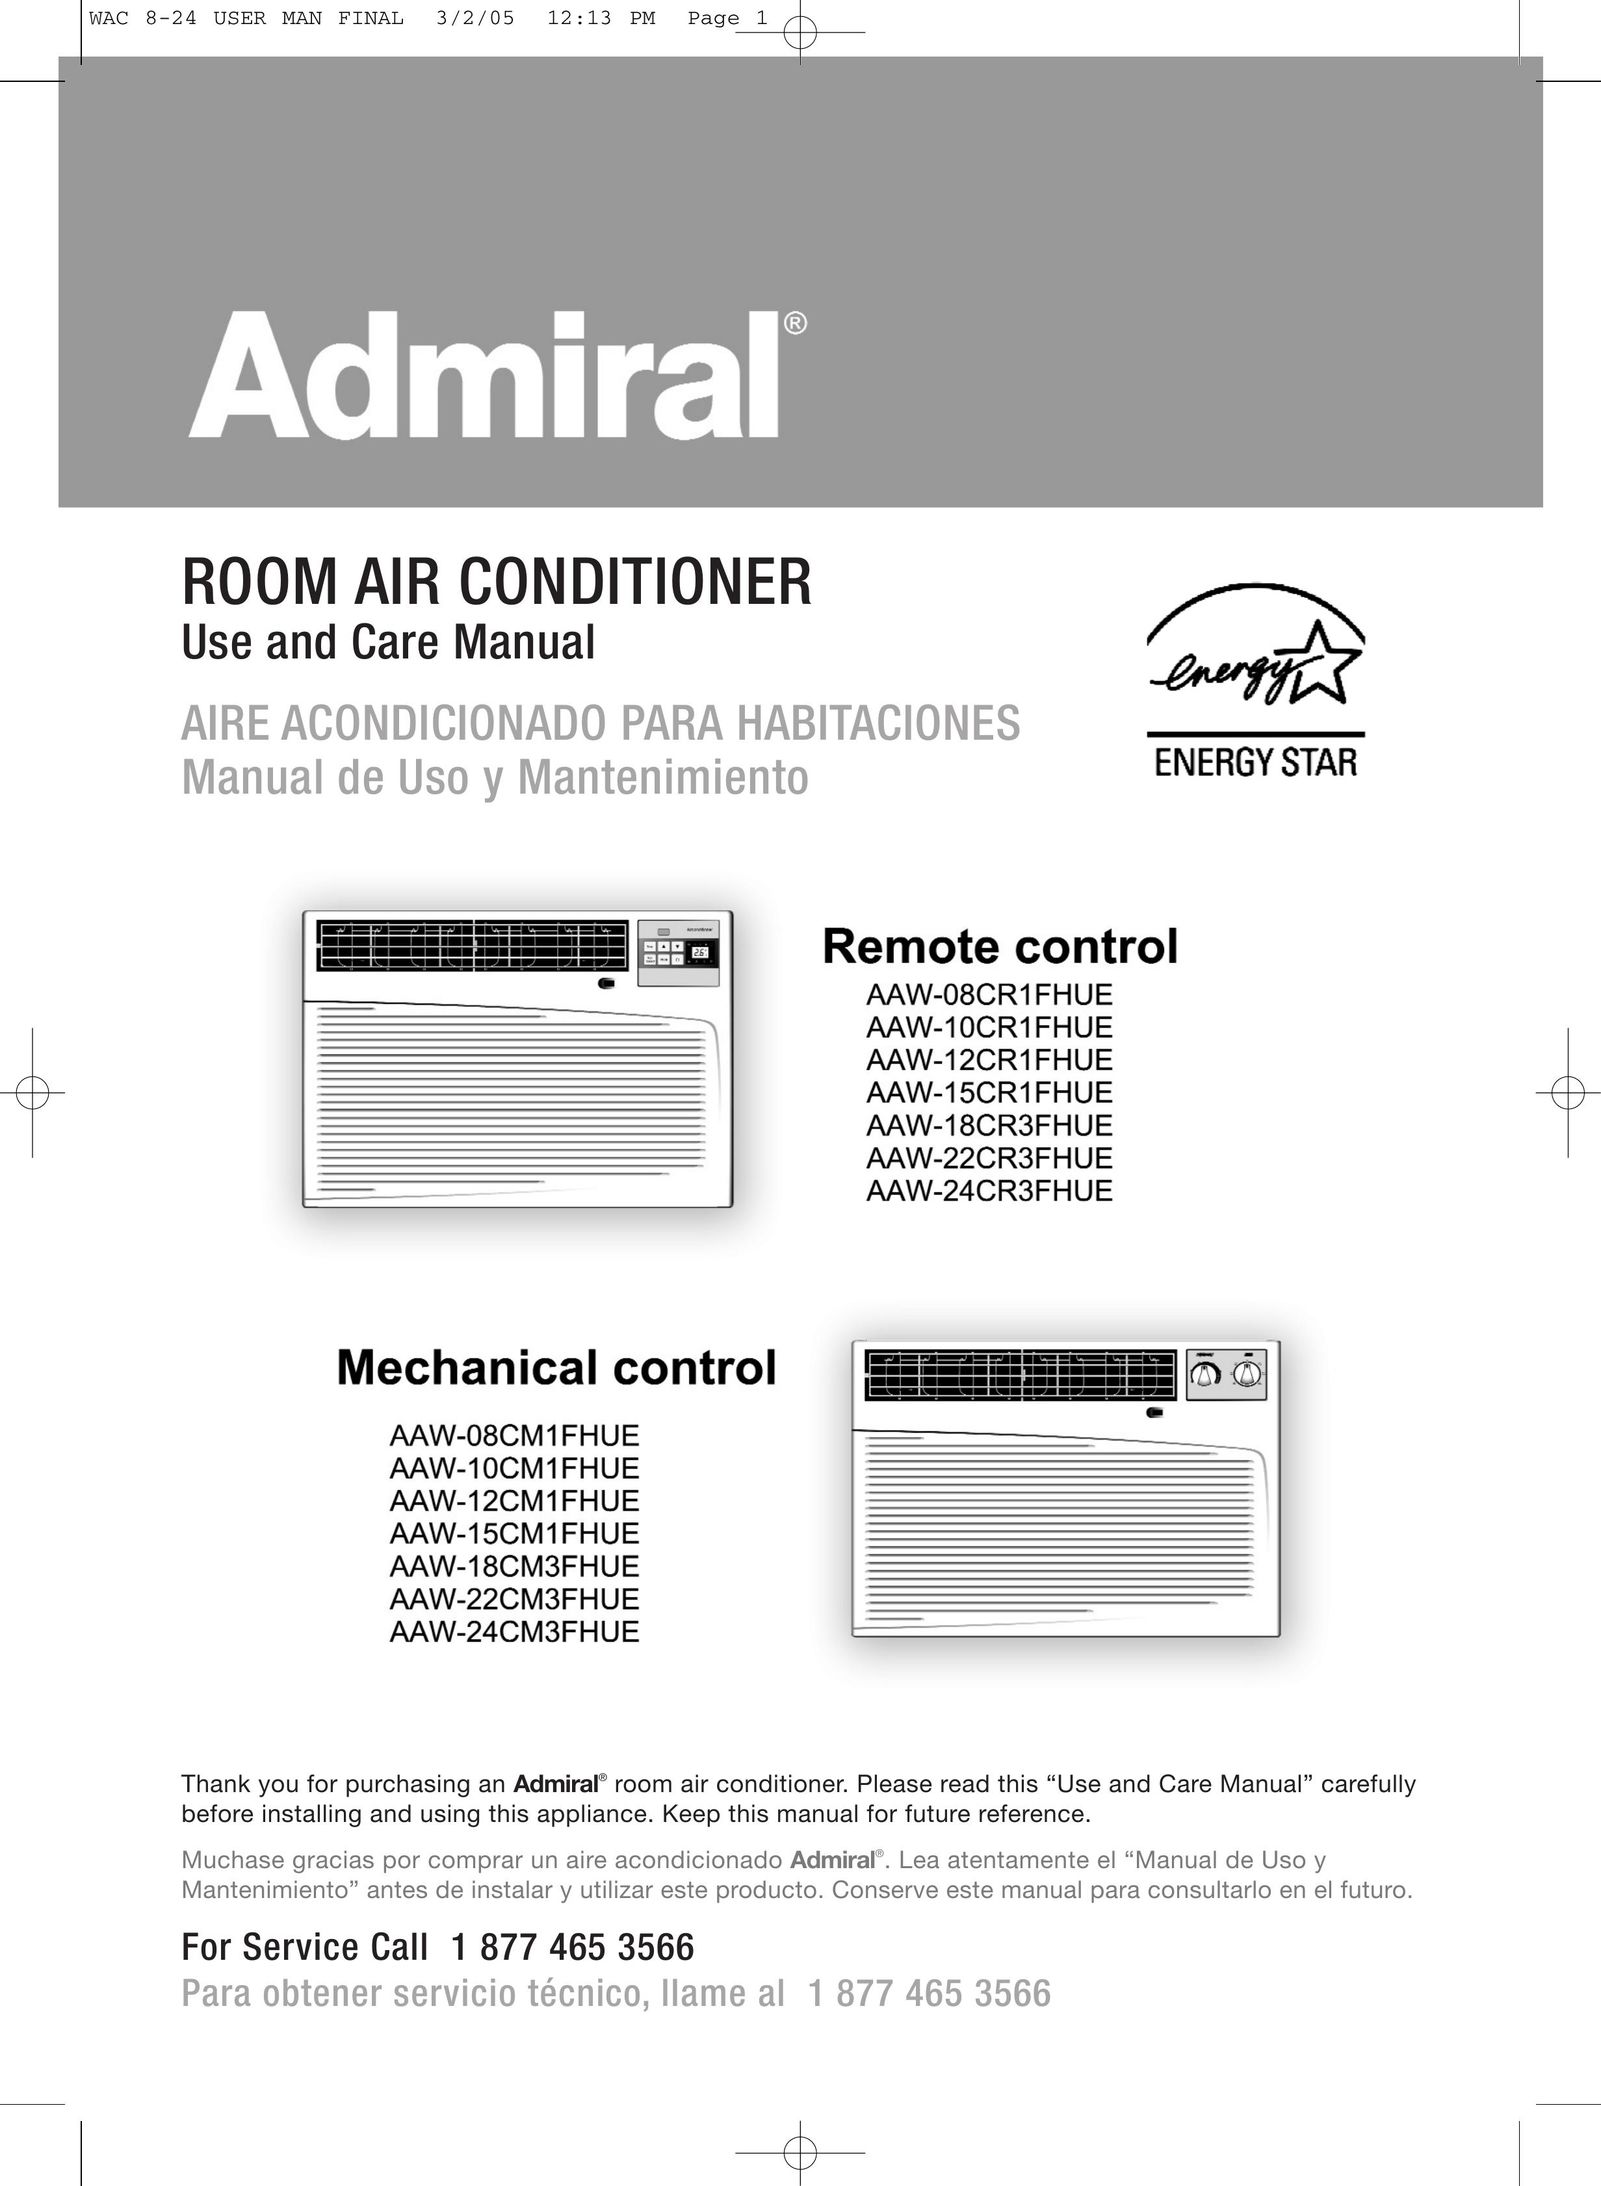 Admiral AAW-08CR1FHUE Air Conditioner User Manual